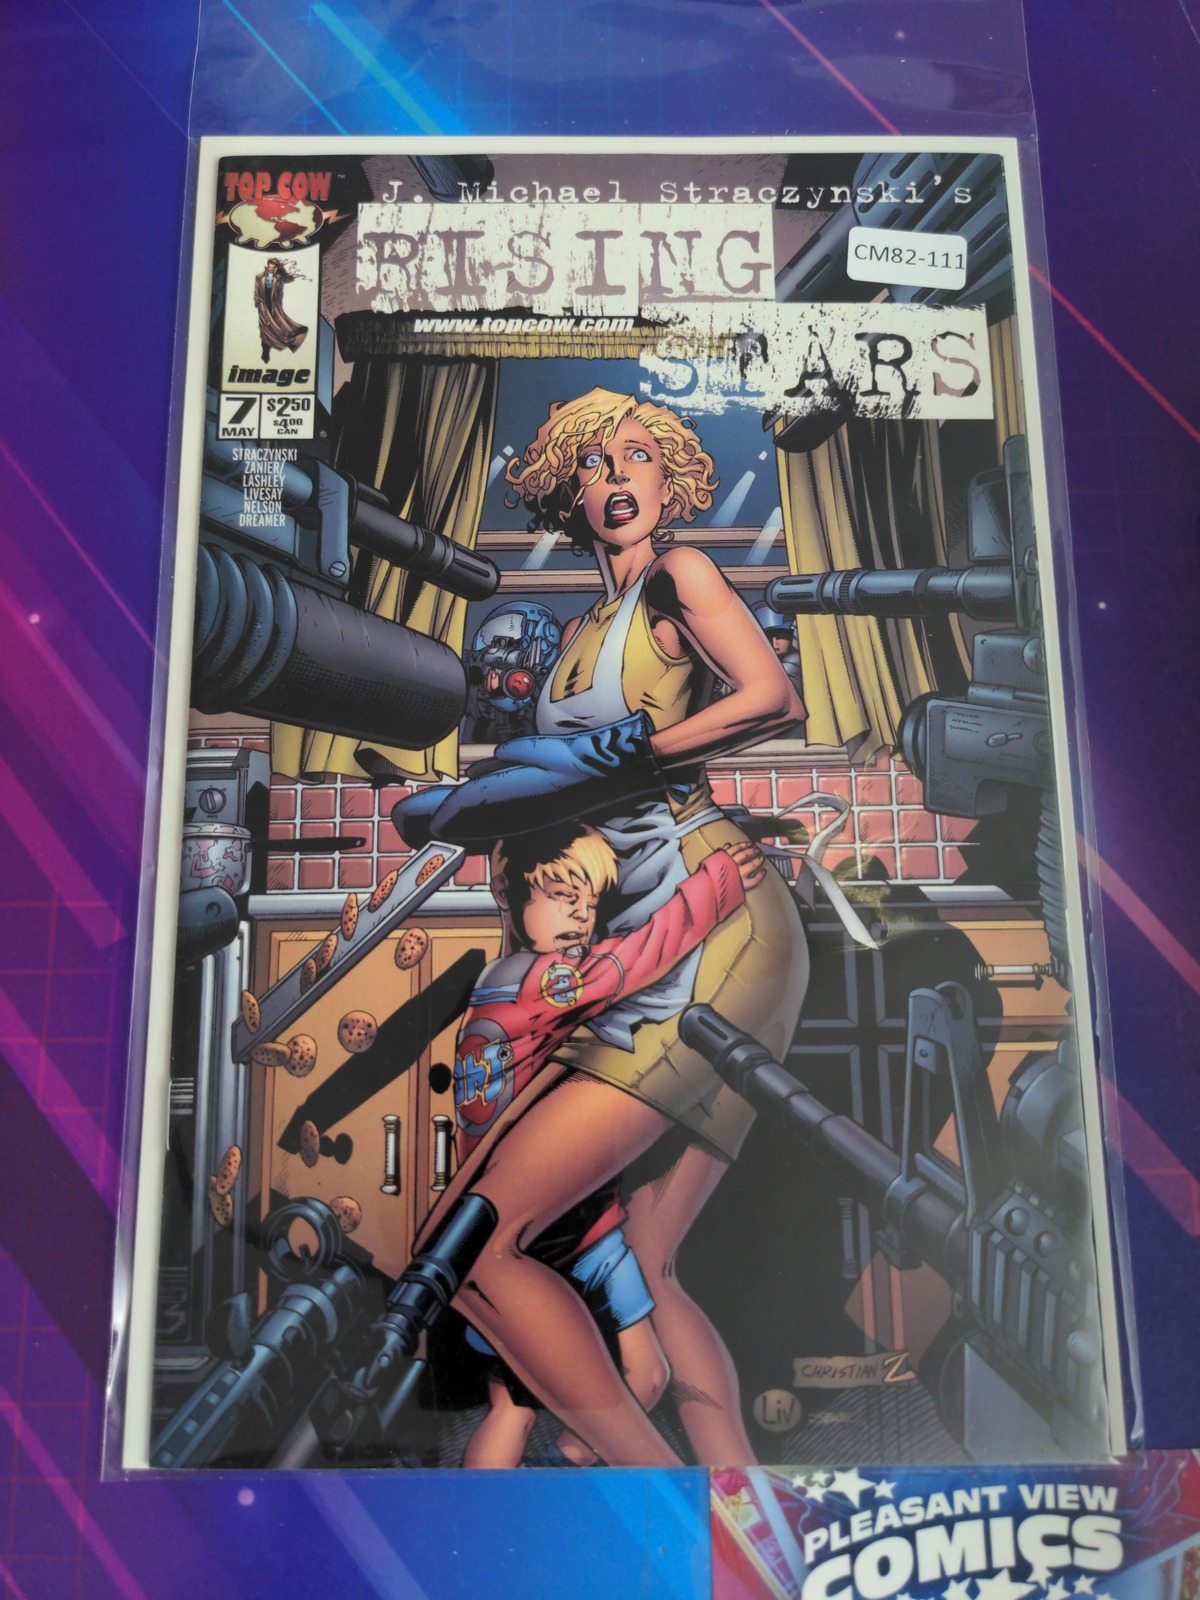 RISING STARS #7 HIGH GRADE TOP COW PRODUCTIONS COMIC BOOK CM82-111